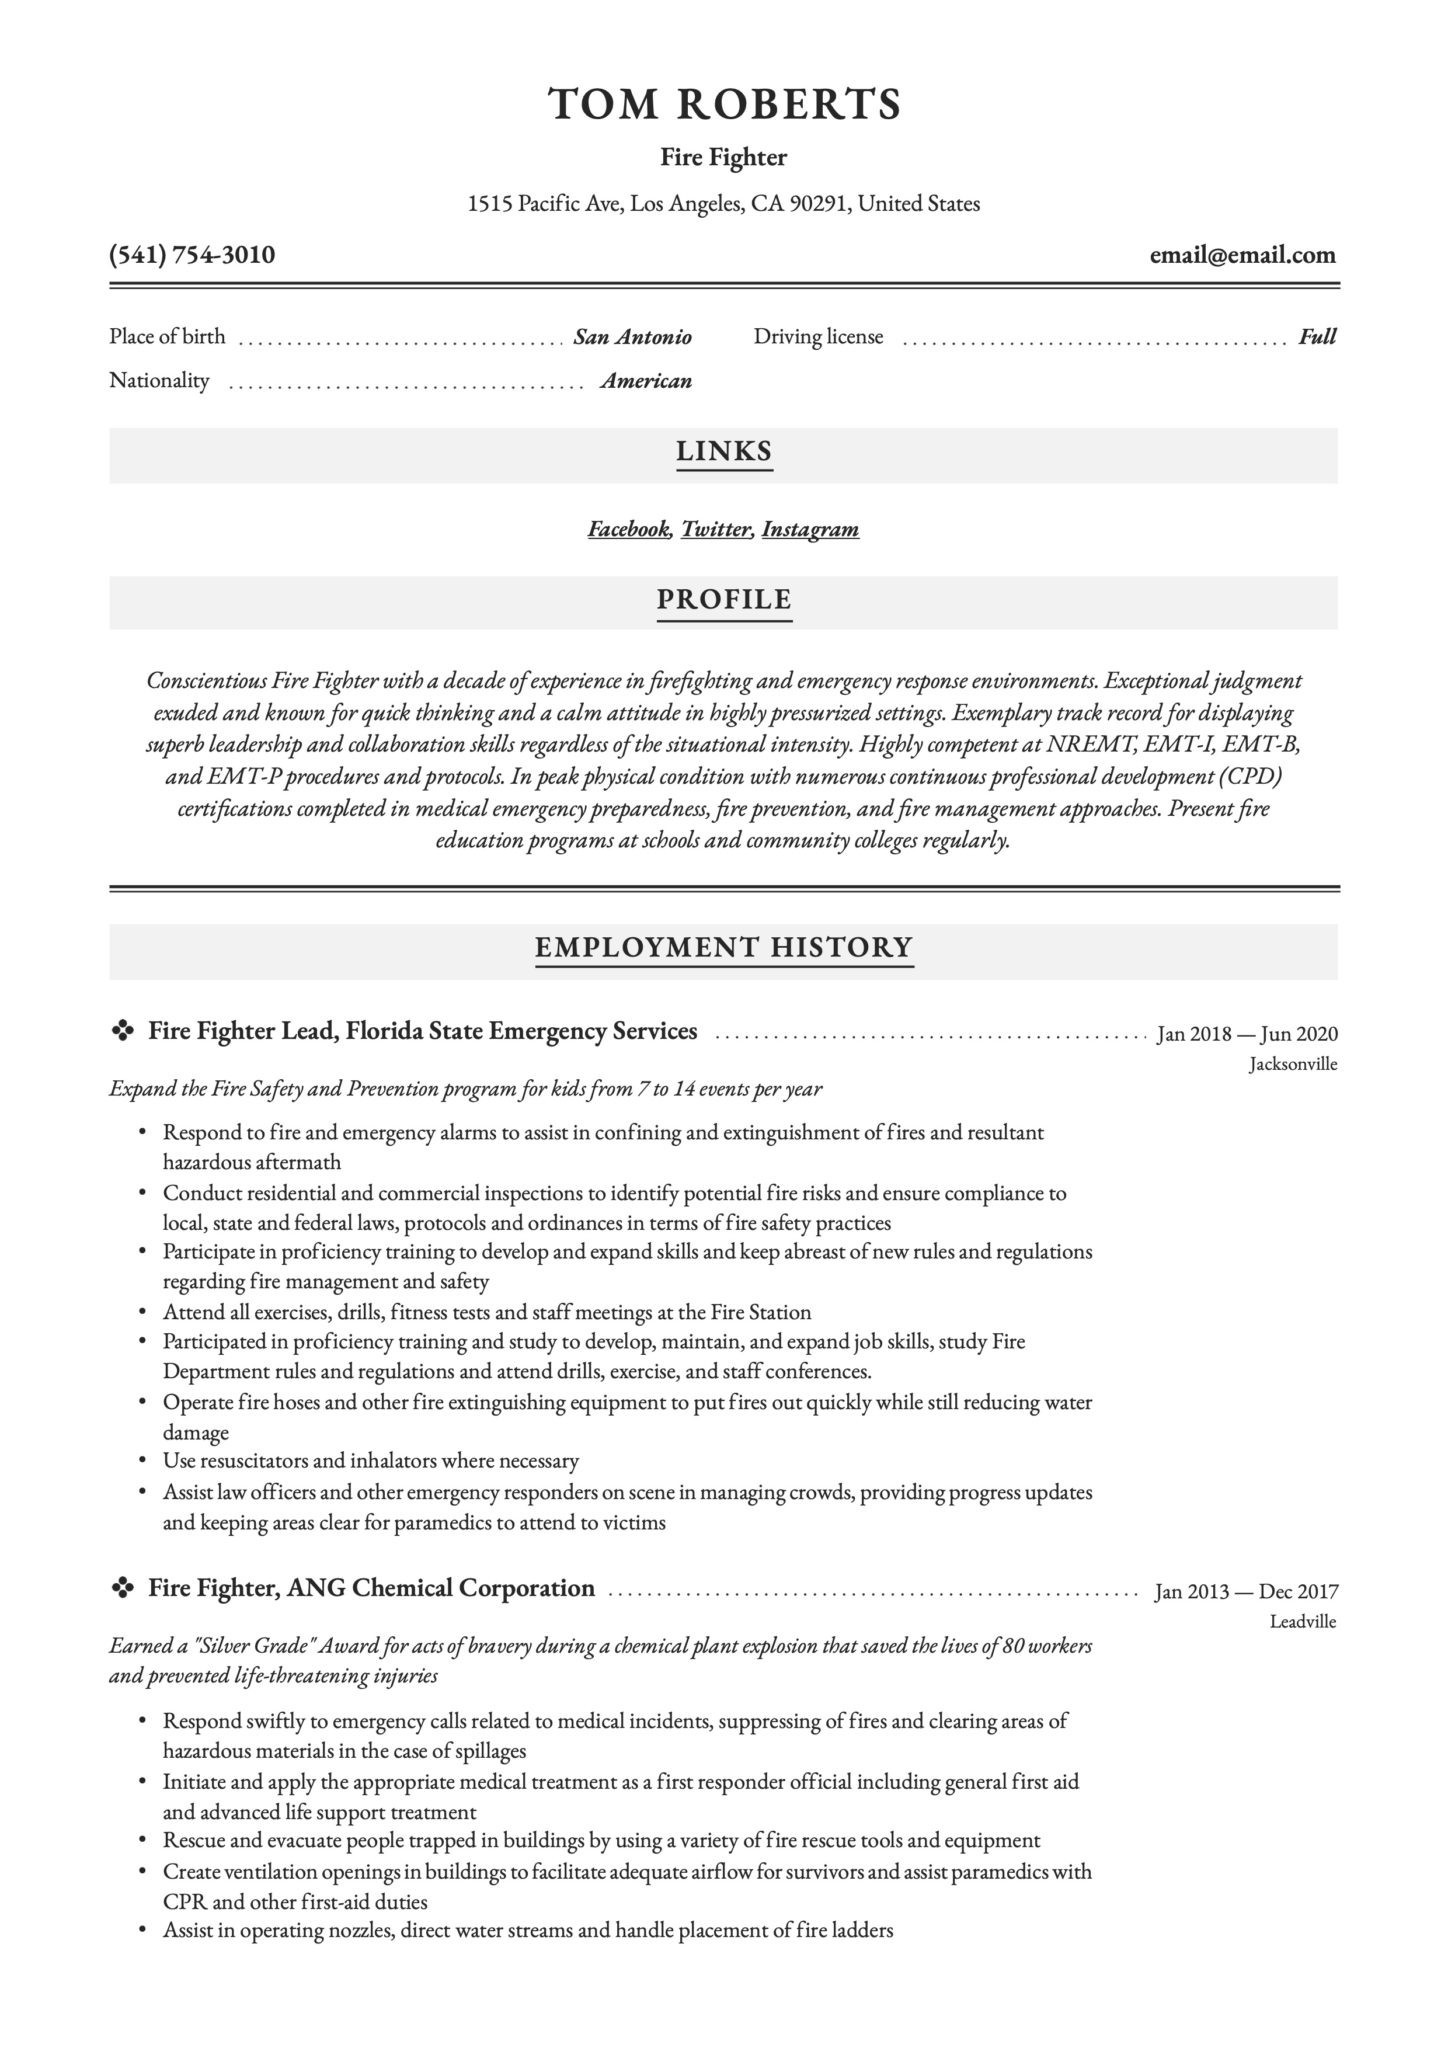 Samples Of Resume for Job as A New Fire Fighter Firefighter Resume & Writing Guide  17 Templates 2022